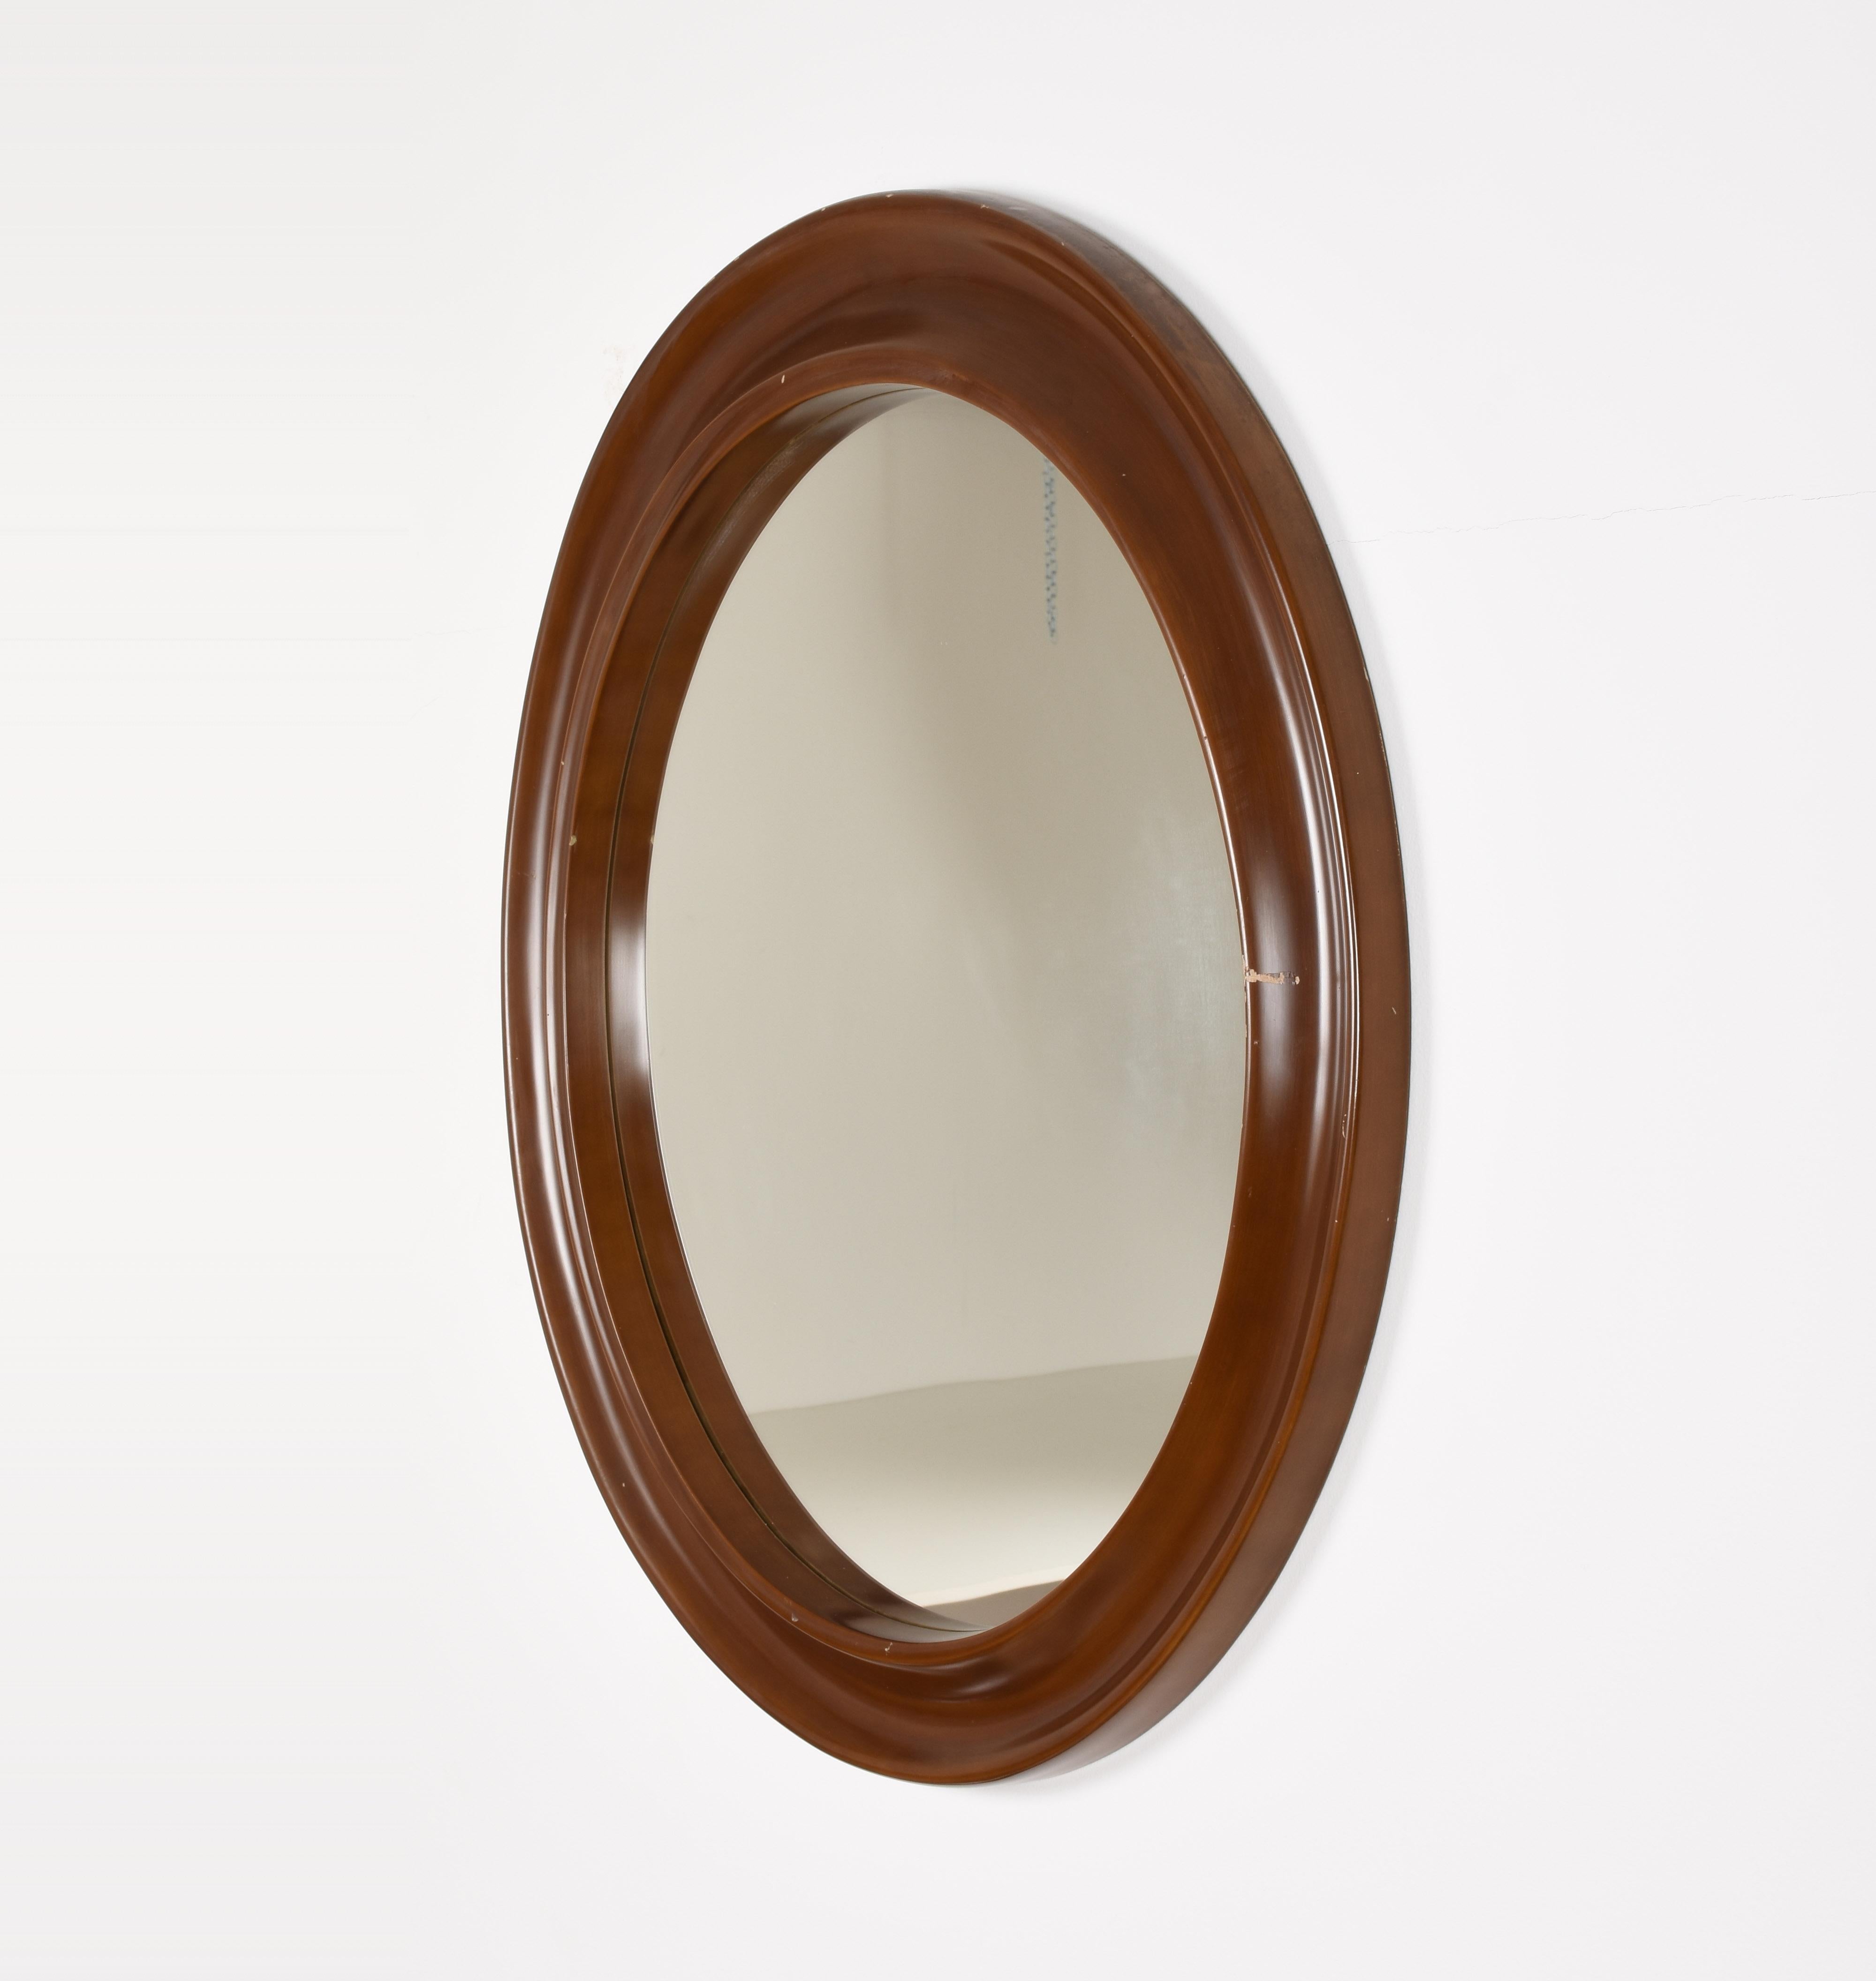 Italian Round Mirror with Frame in Lacquered Wood, Italy Design, 1970s